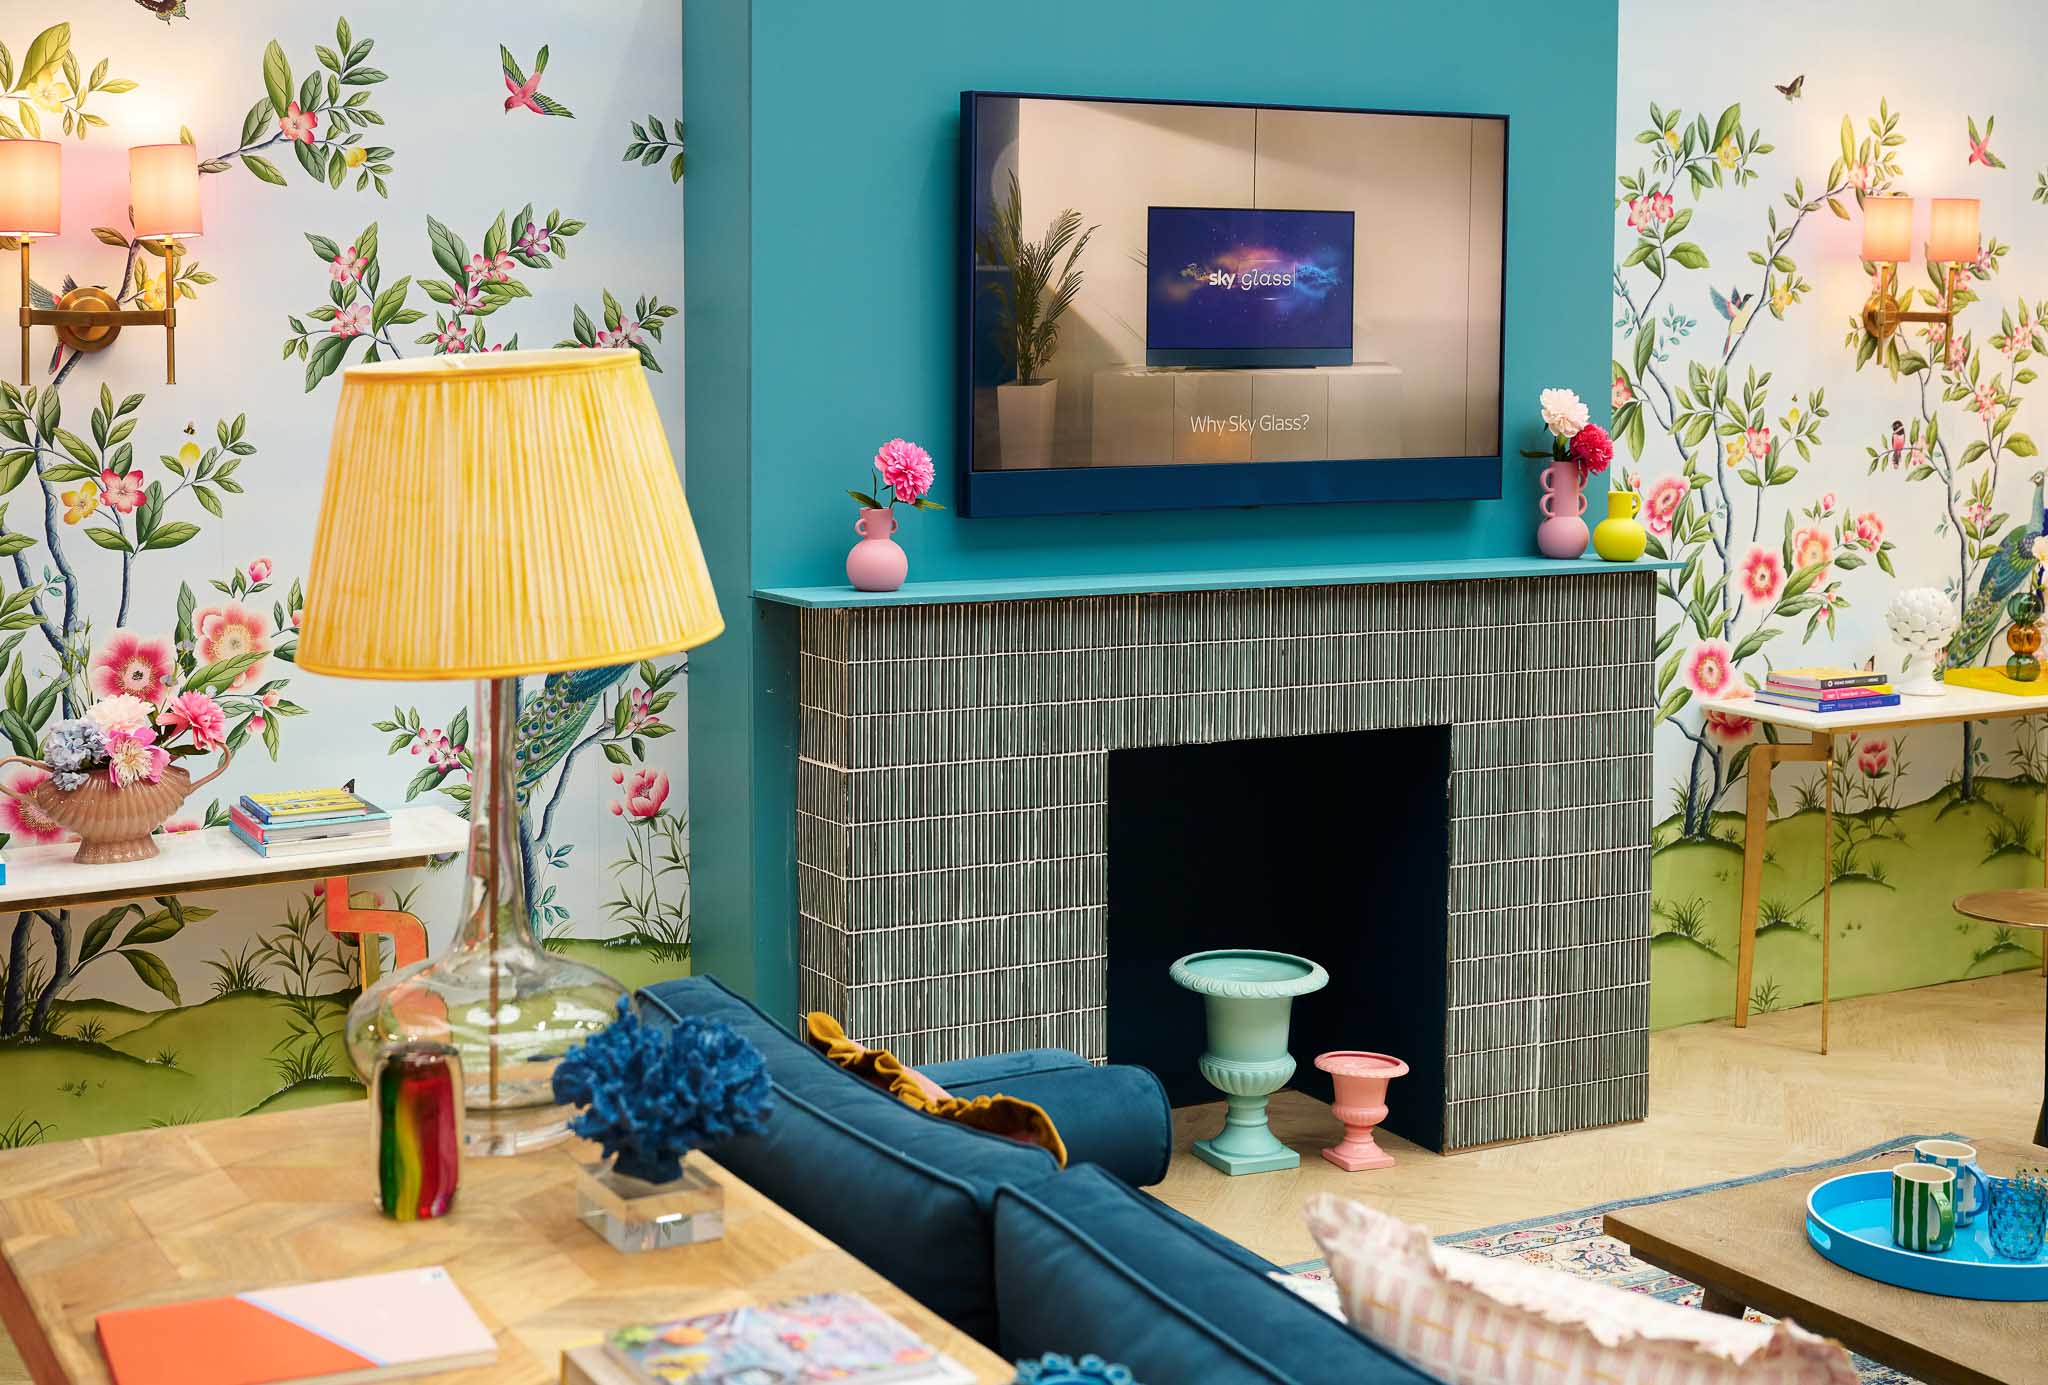 Floral wallpaper mural with sky glass TV beautiful maximalist colourful living room